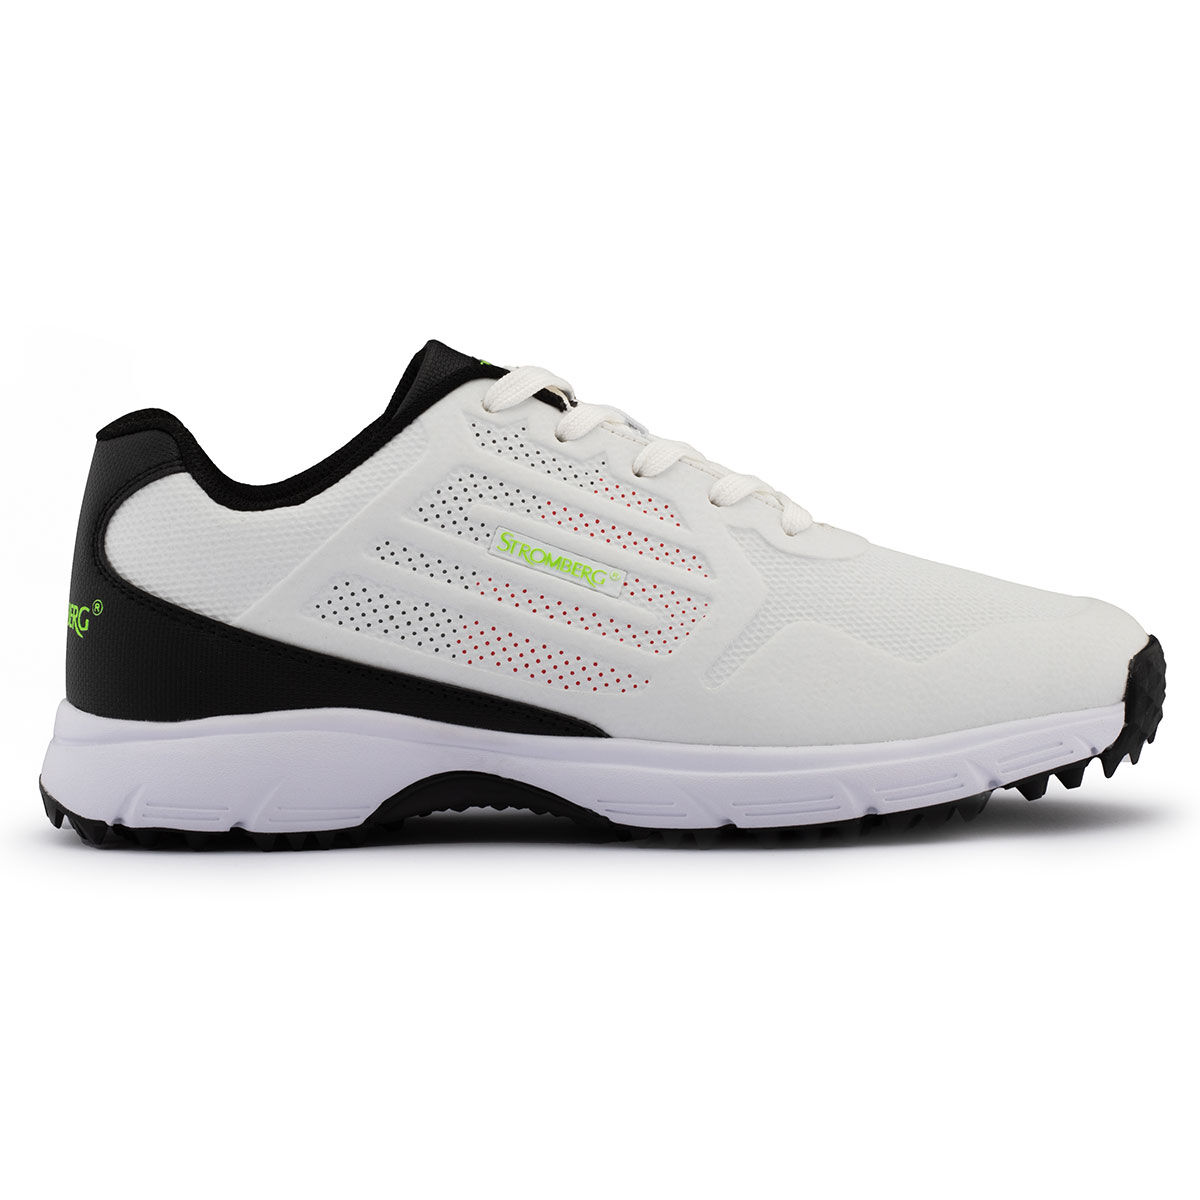 Stromberg Mens White and Black Waterproof Colourblock Firma Spikeless Golf Shoes, Size: 9| American Golf von Stromberg